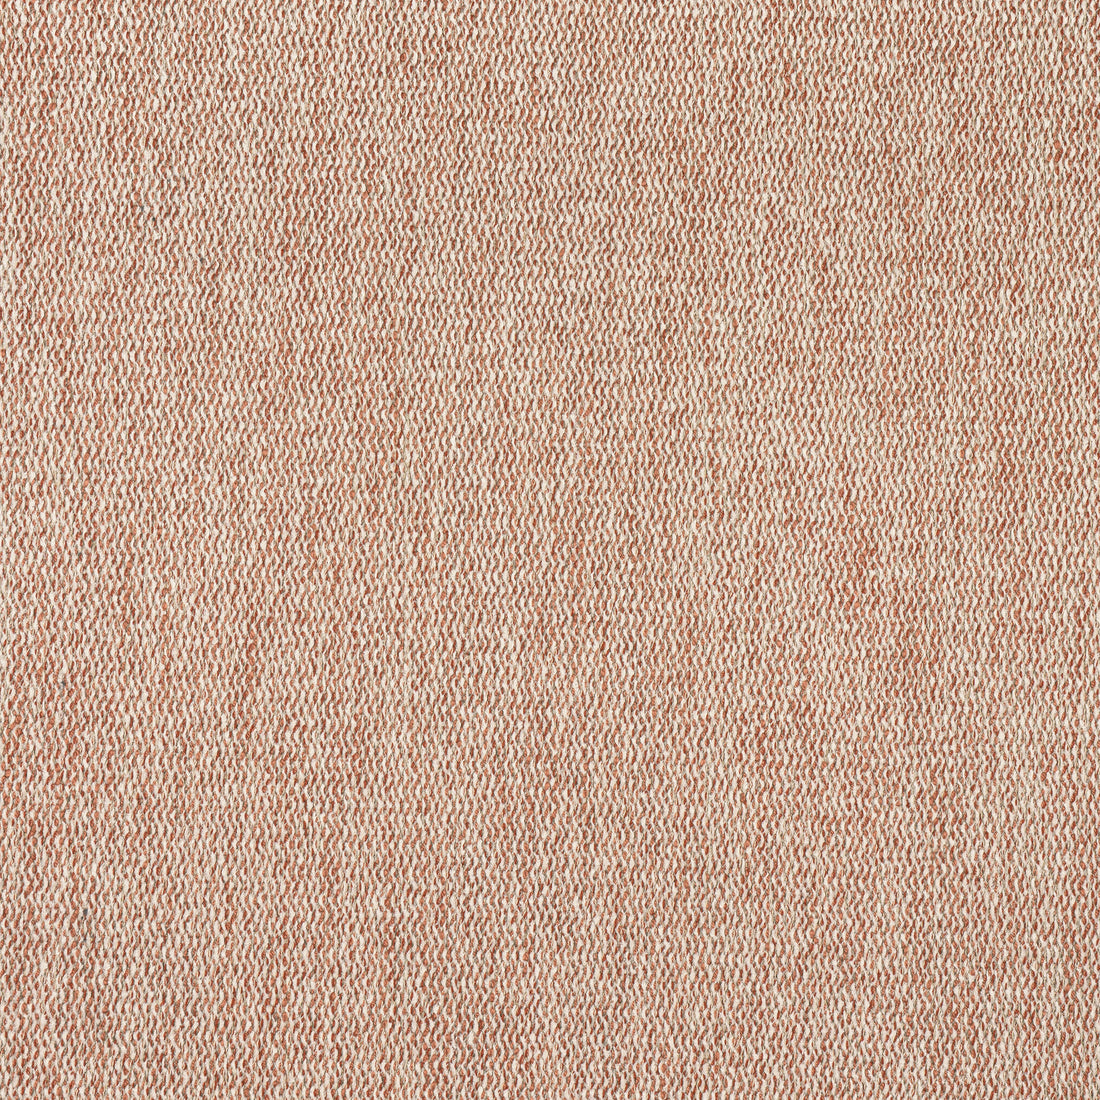 Arroyo fabric in clay color - pattern number W8783 - by Thibaut in the Haven Textures collection